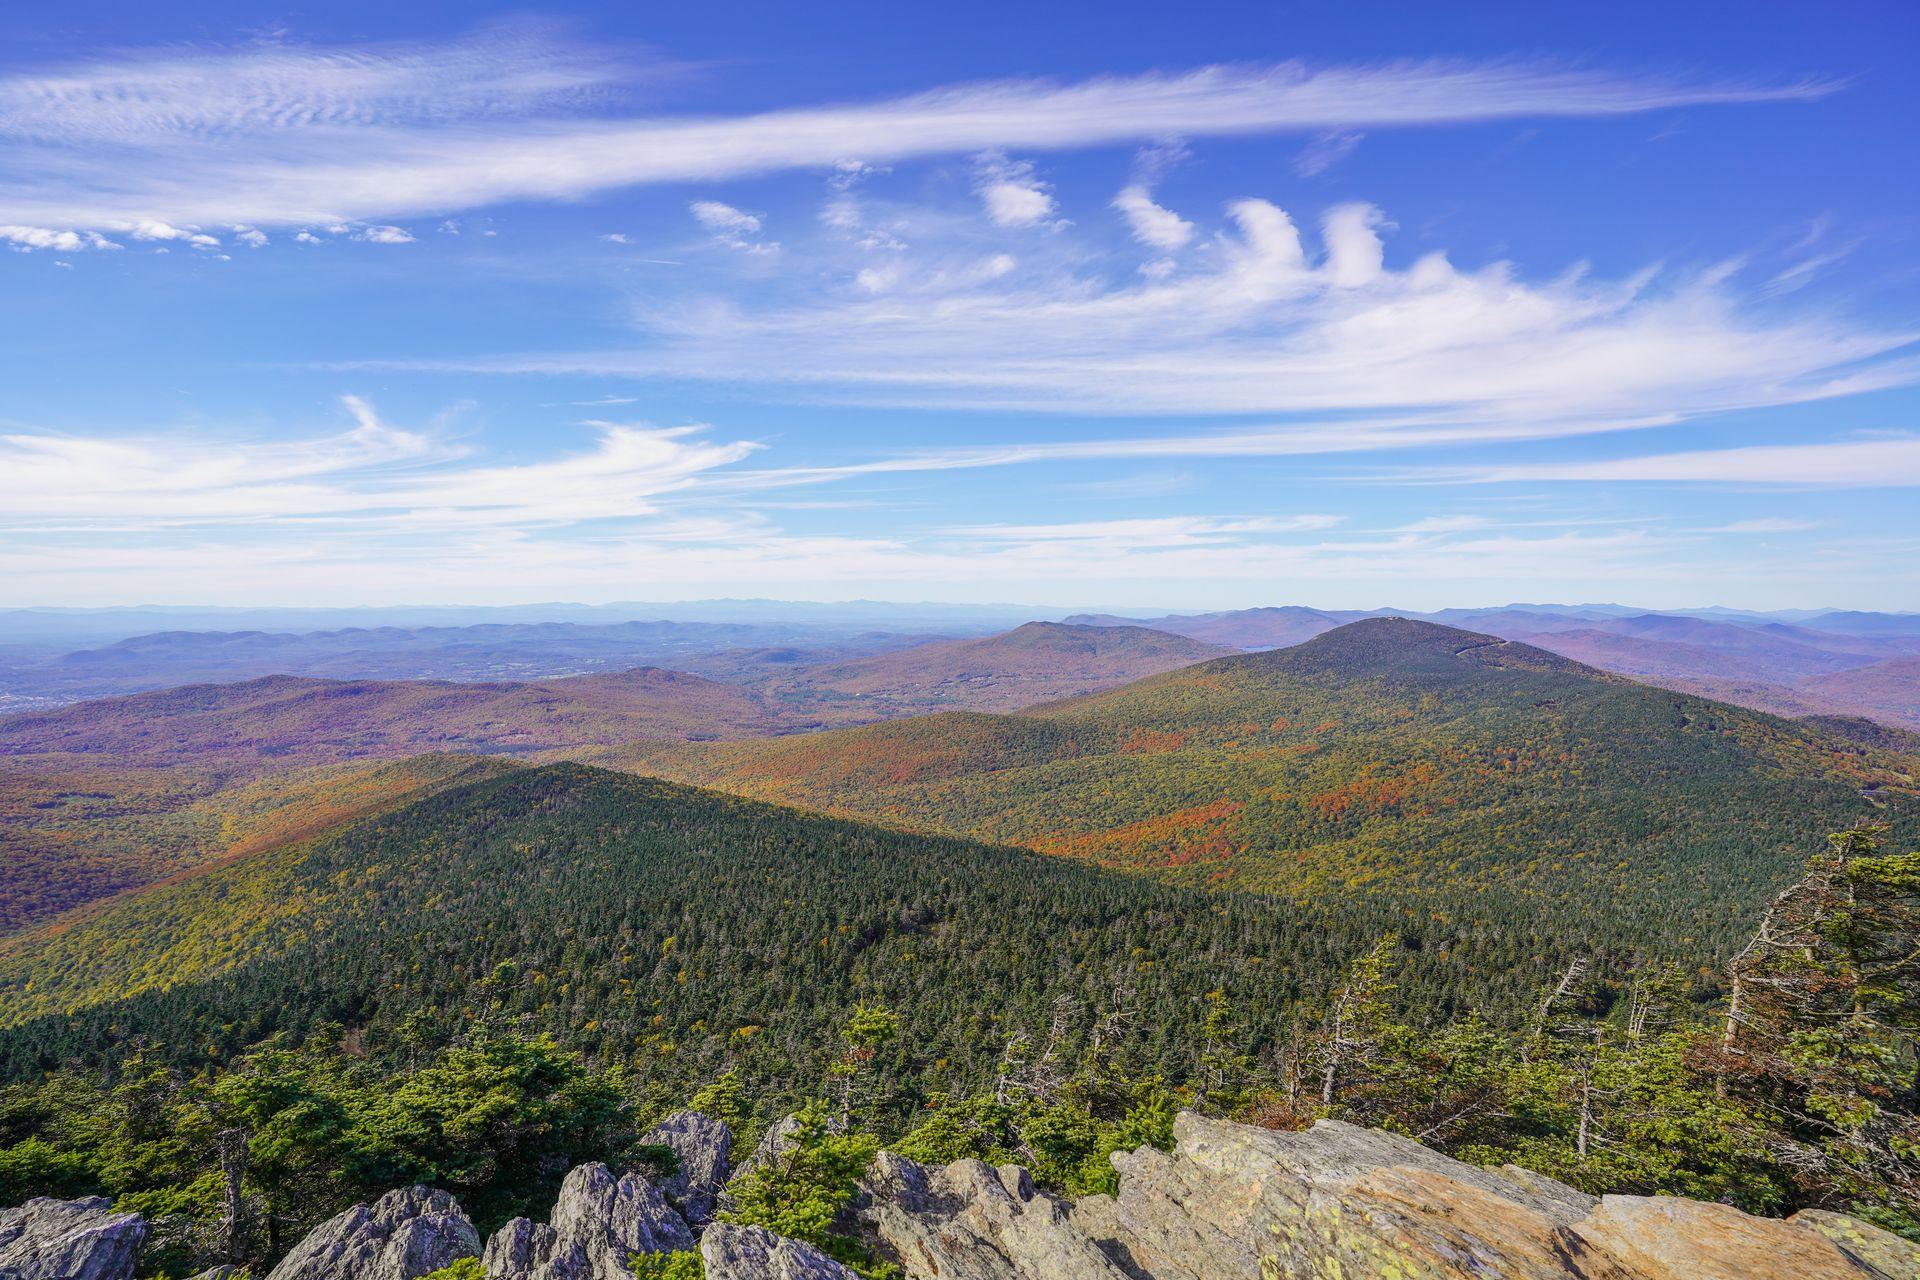 A view of mountains sprinkled with fall foliage seen from the top of Killington Peak in Vermont.